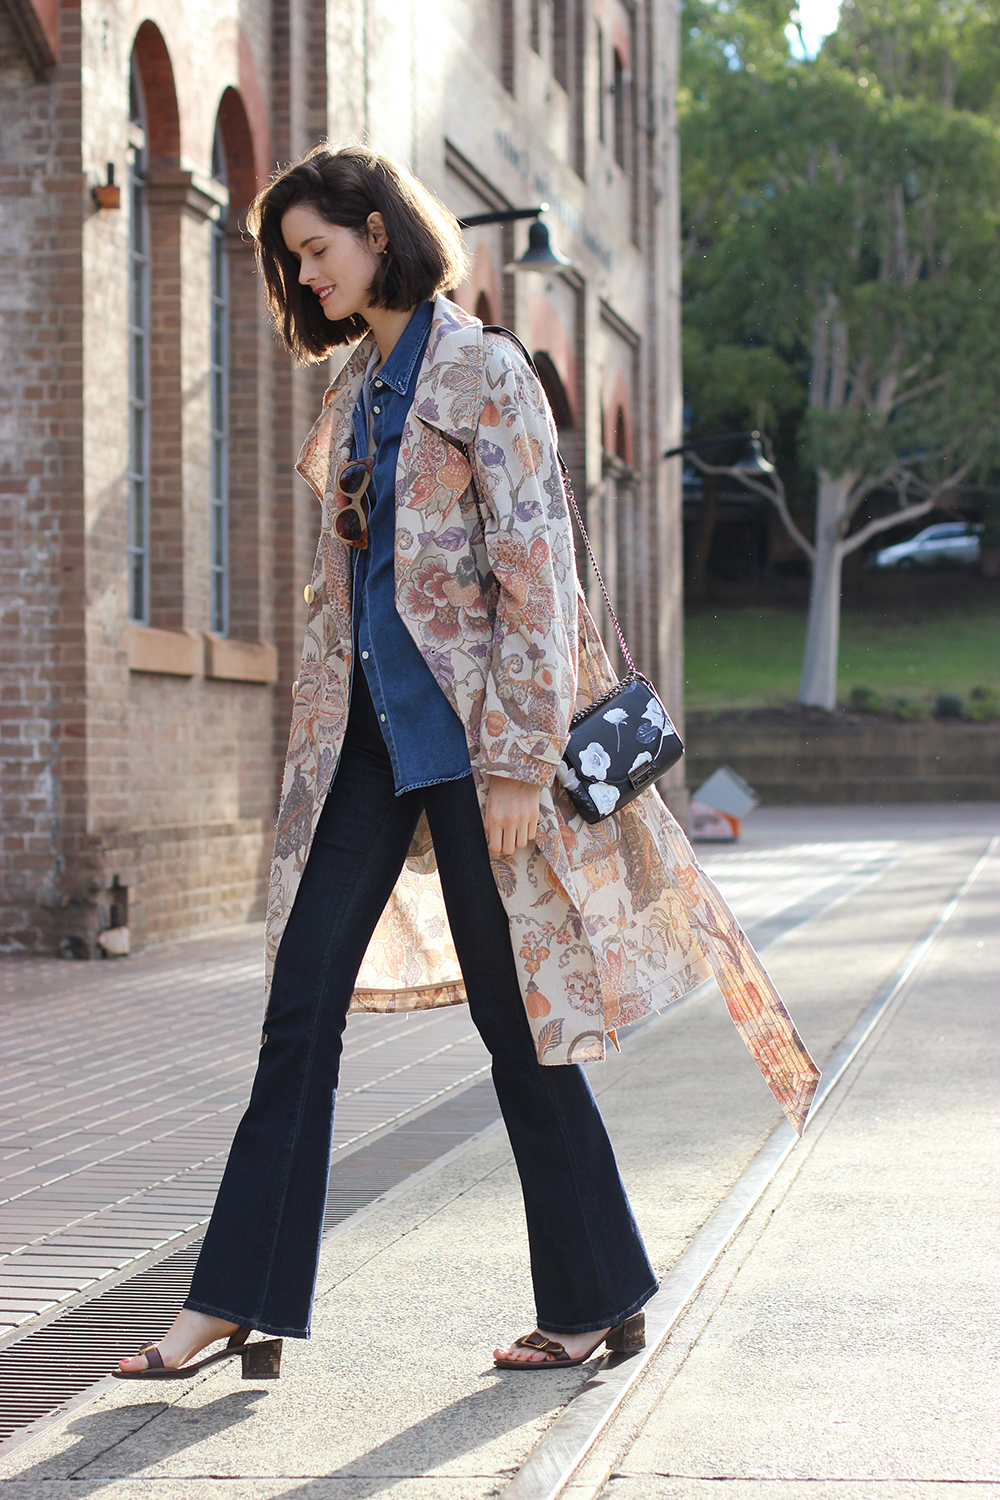 Sydney-Style-Blogger-Chloe-Hill-wearing-Karen-walker-trench-coat-acne-denim-shirt-pared-sunglasses-Alila-floral-print-bag-and-citizens-of-humanity-sculpt-flares-at-carriage-works